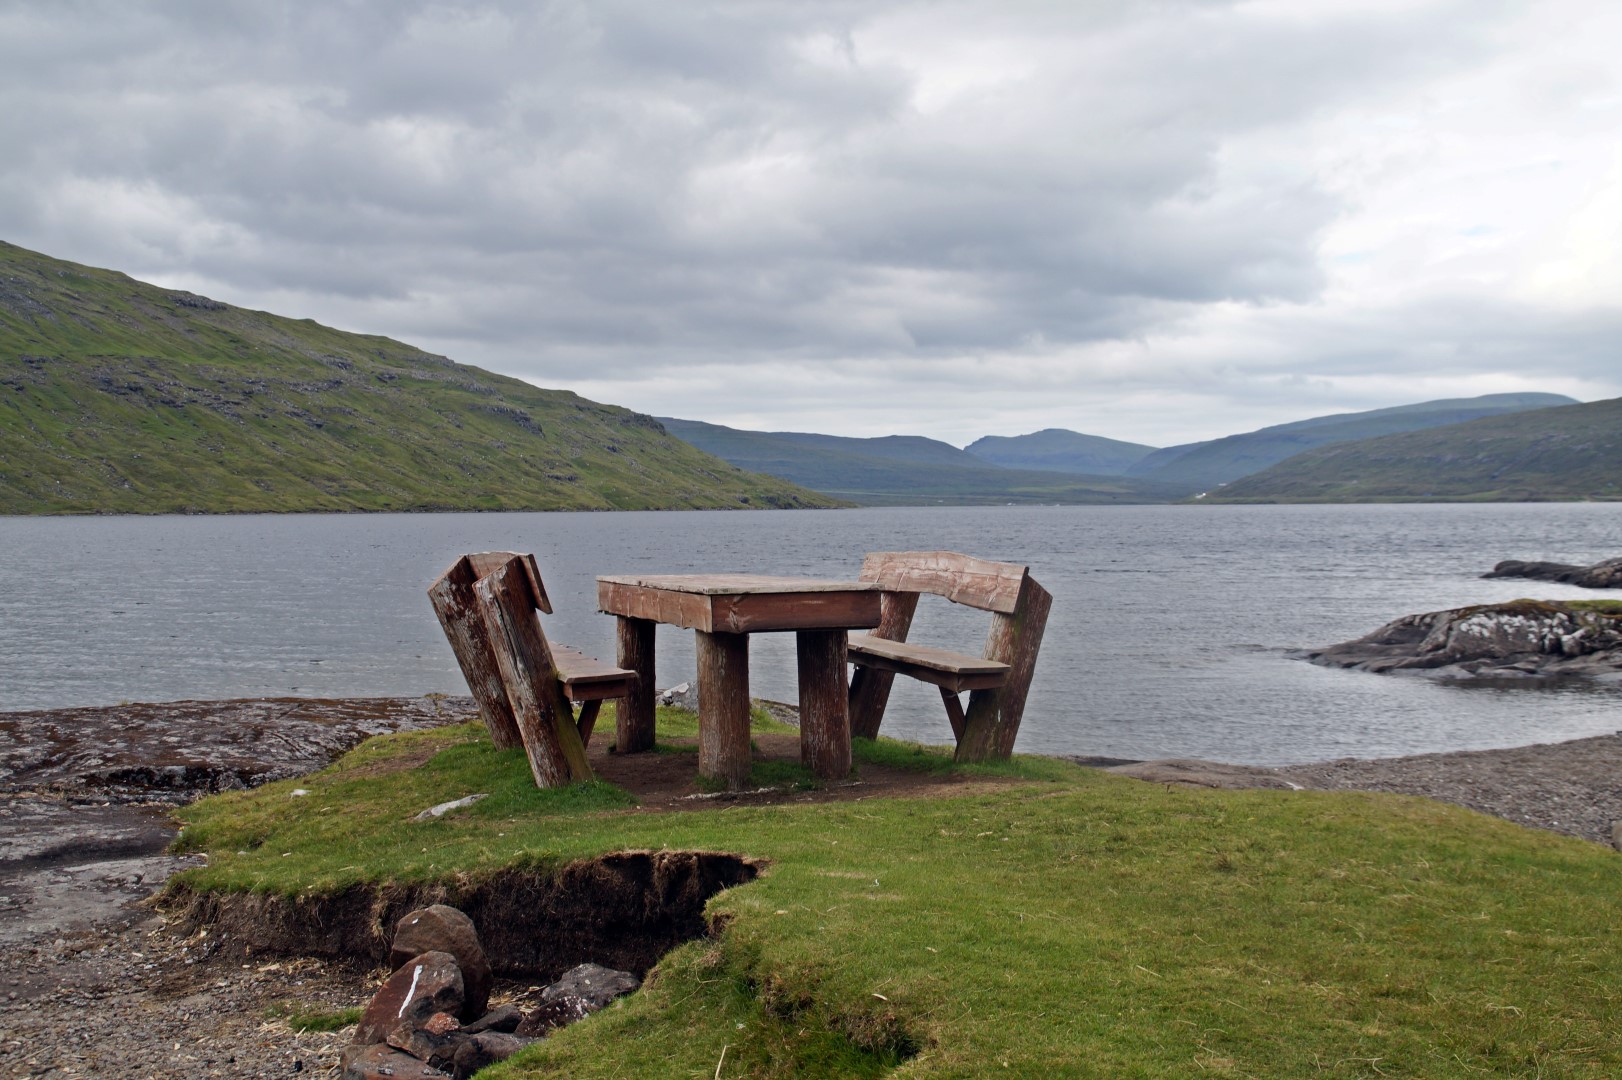 This has got to be the best picnic table in the world!